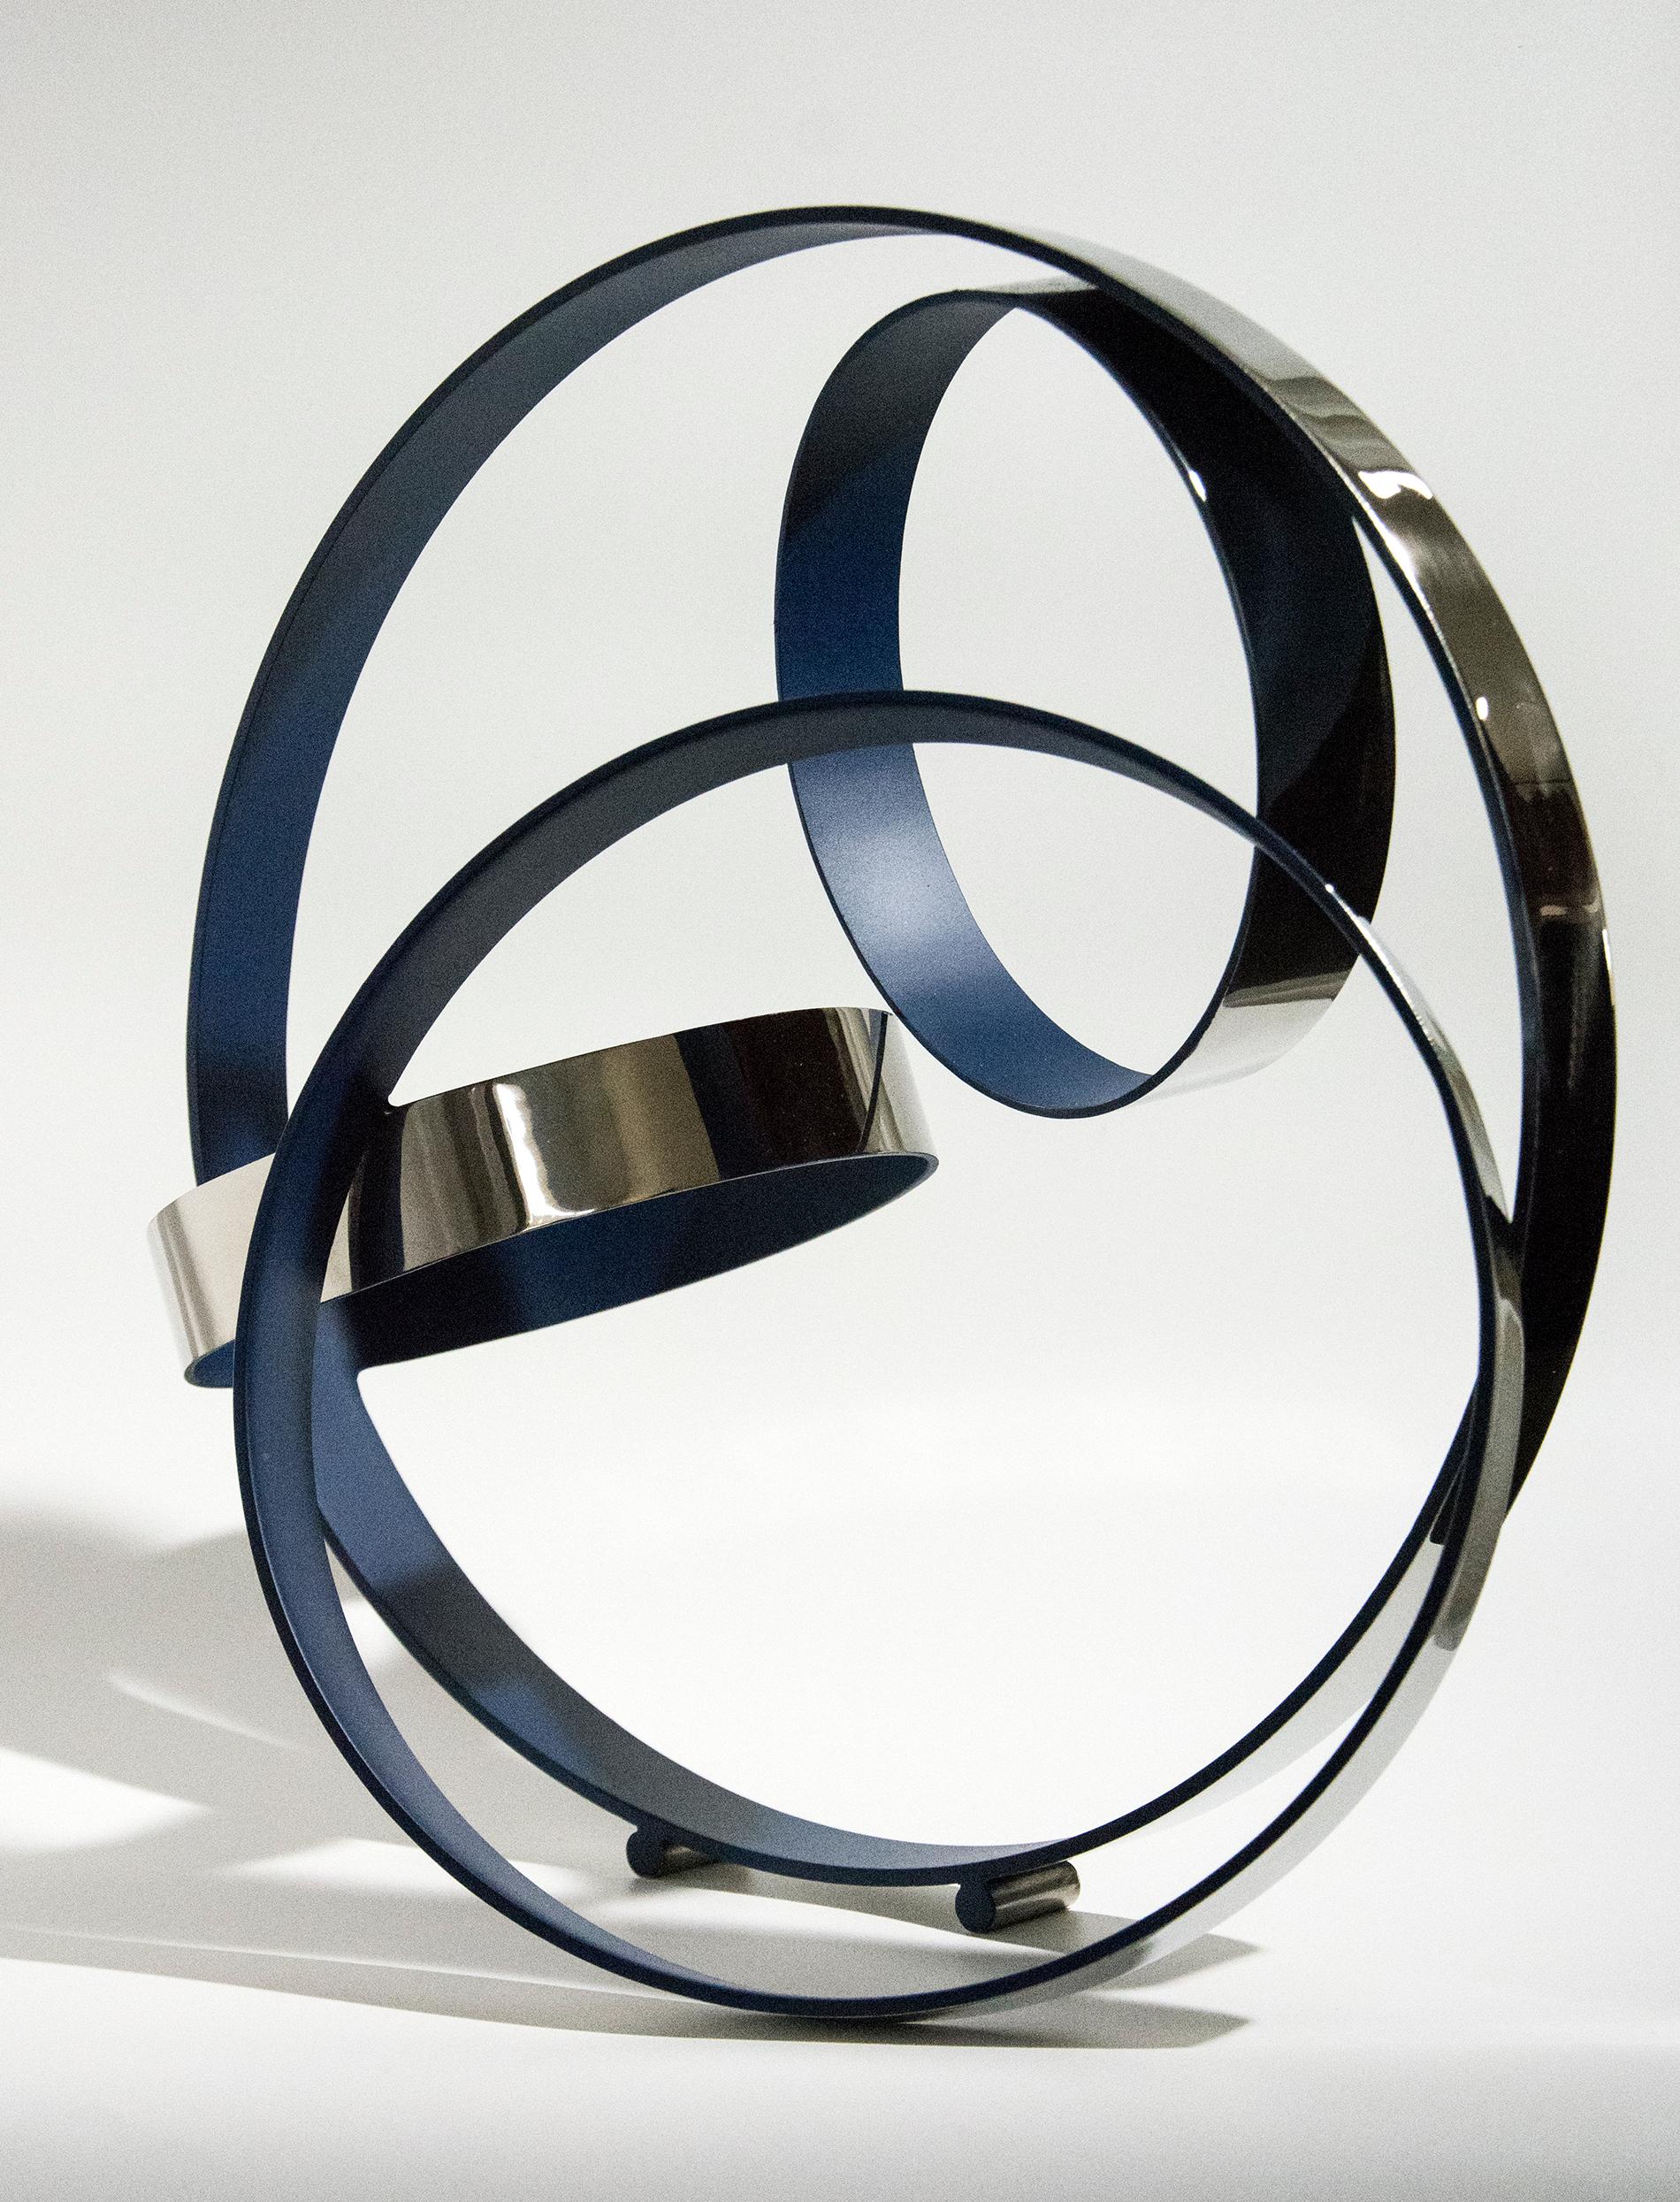 Four Ring Temps Zero Ultra Marine Blue - Contemporary Sculpture by Philippe Pallafray